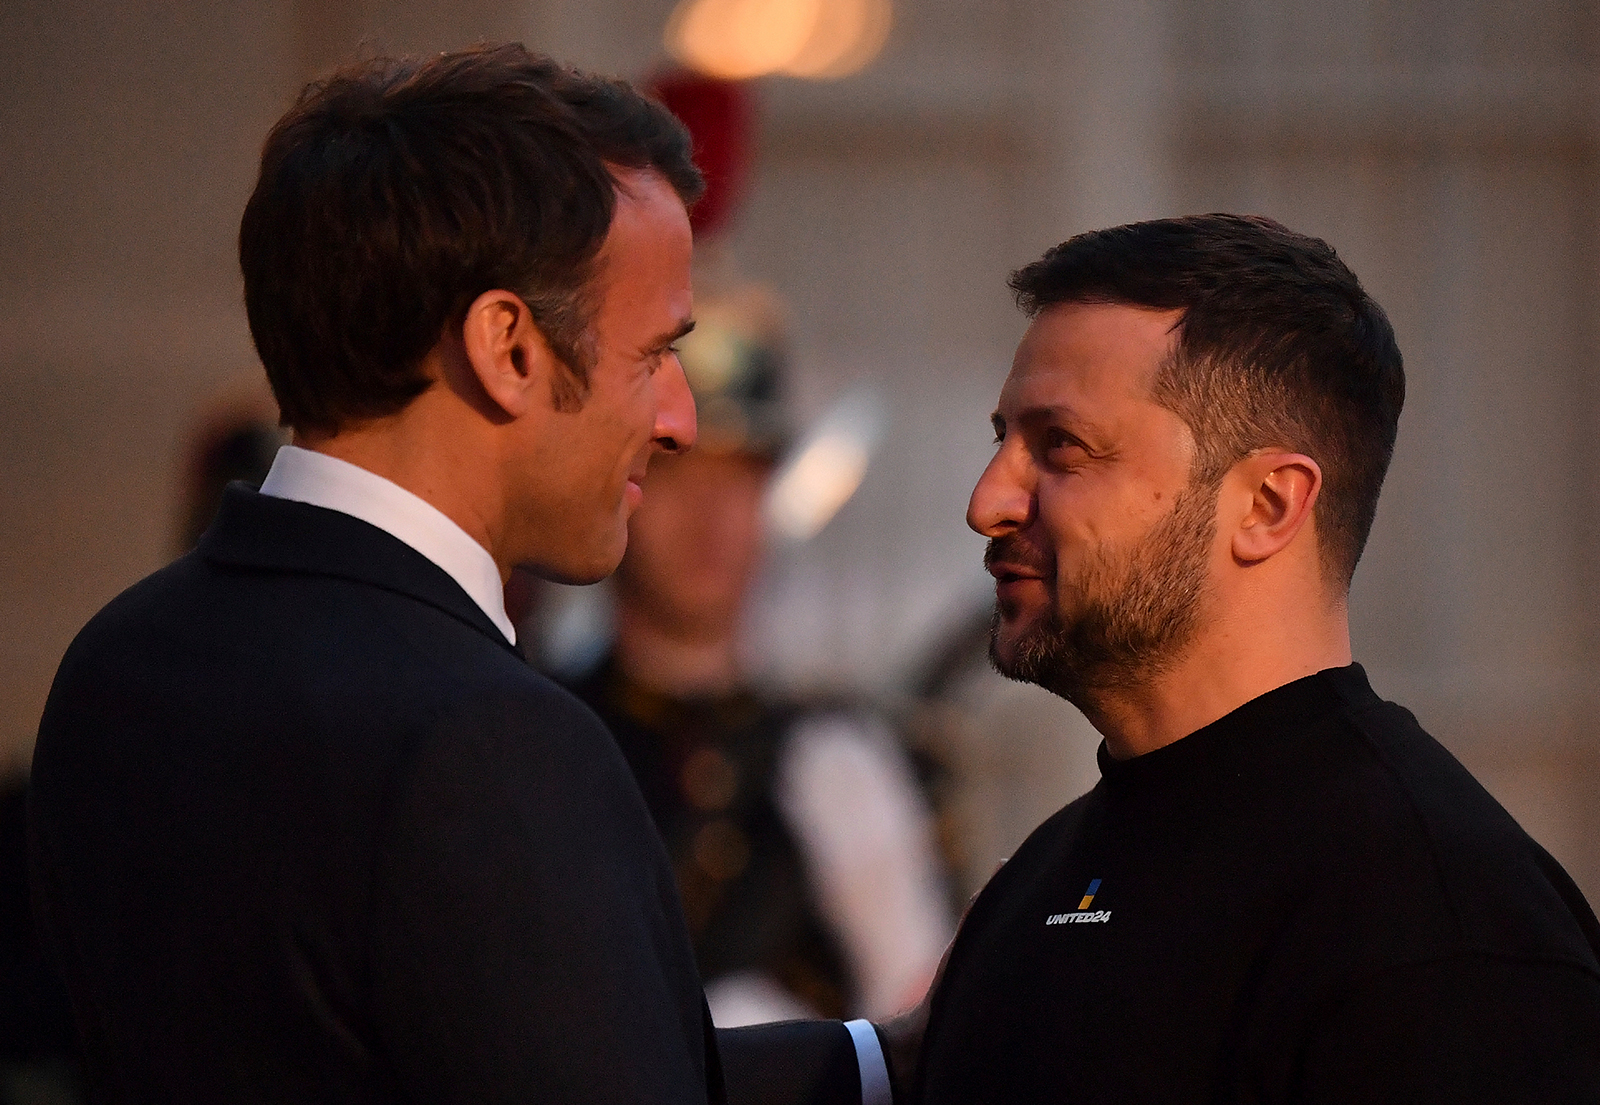 Volodymyr Zelensky is welcomed by Emmanuel Macron upon his arrival at the Elysee presidential palace in Paris on May 14.